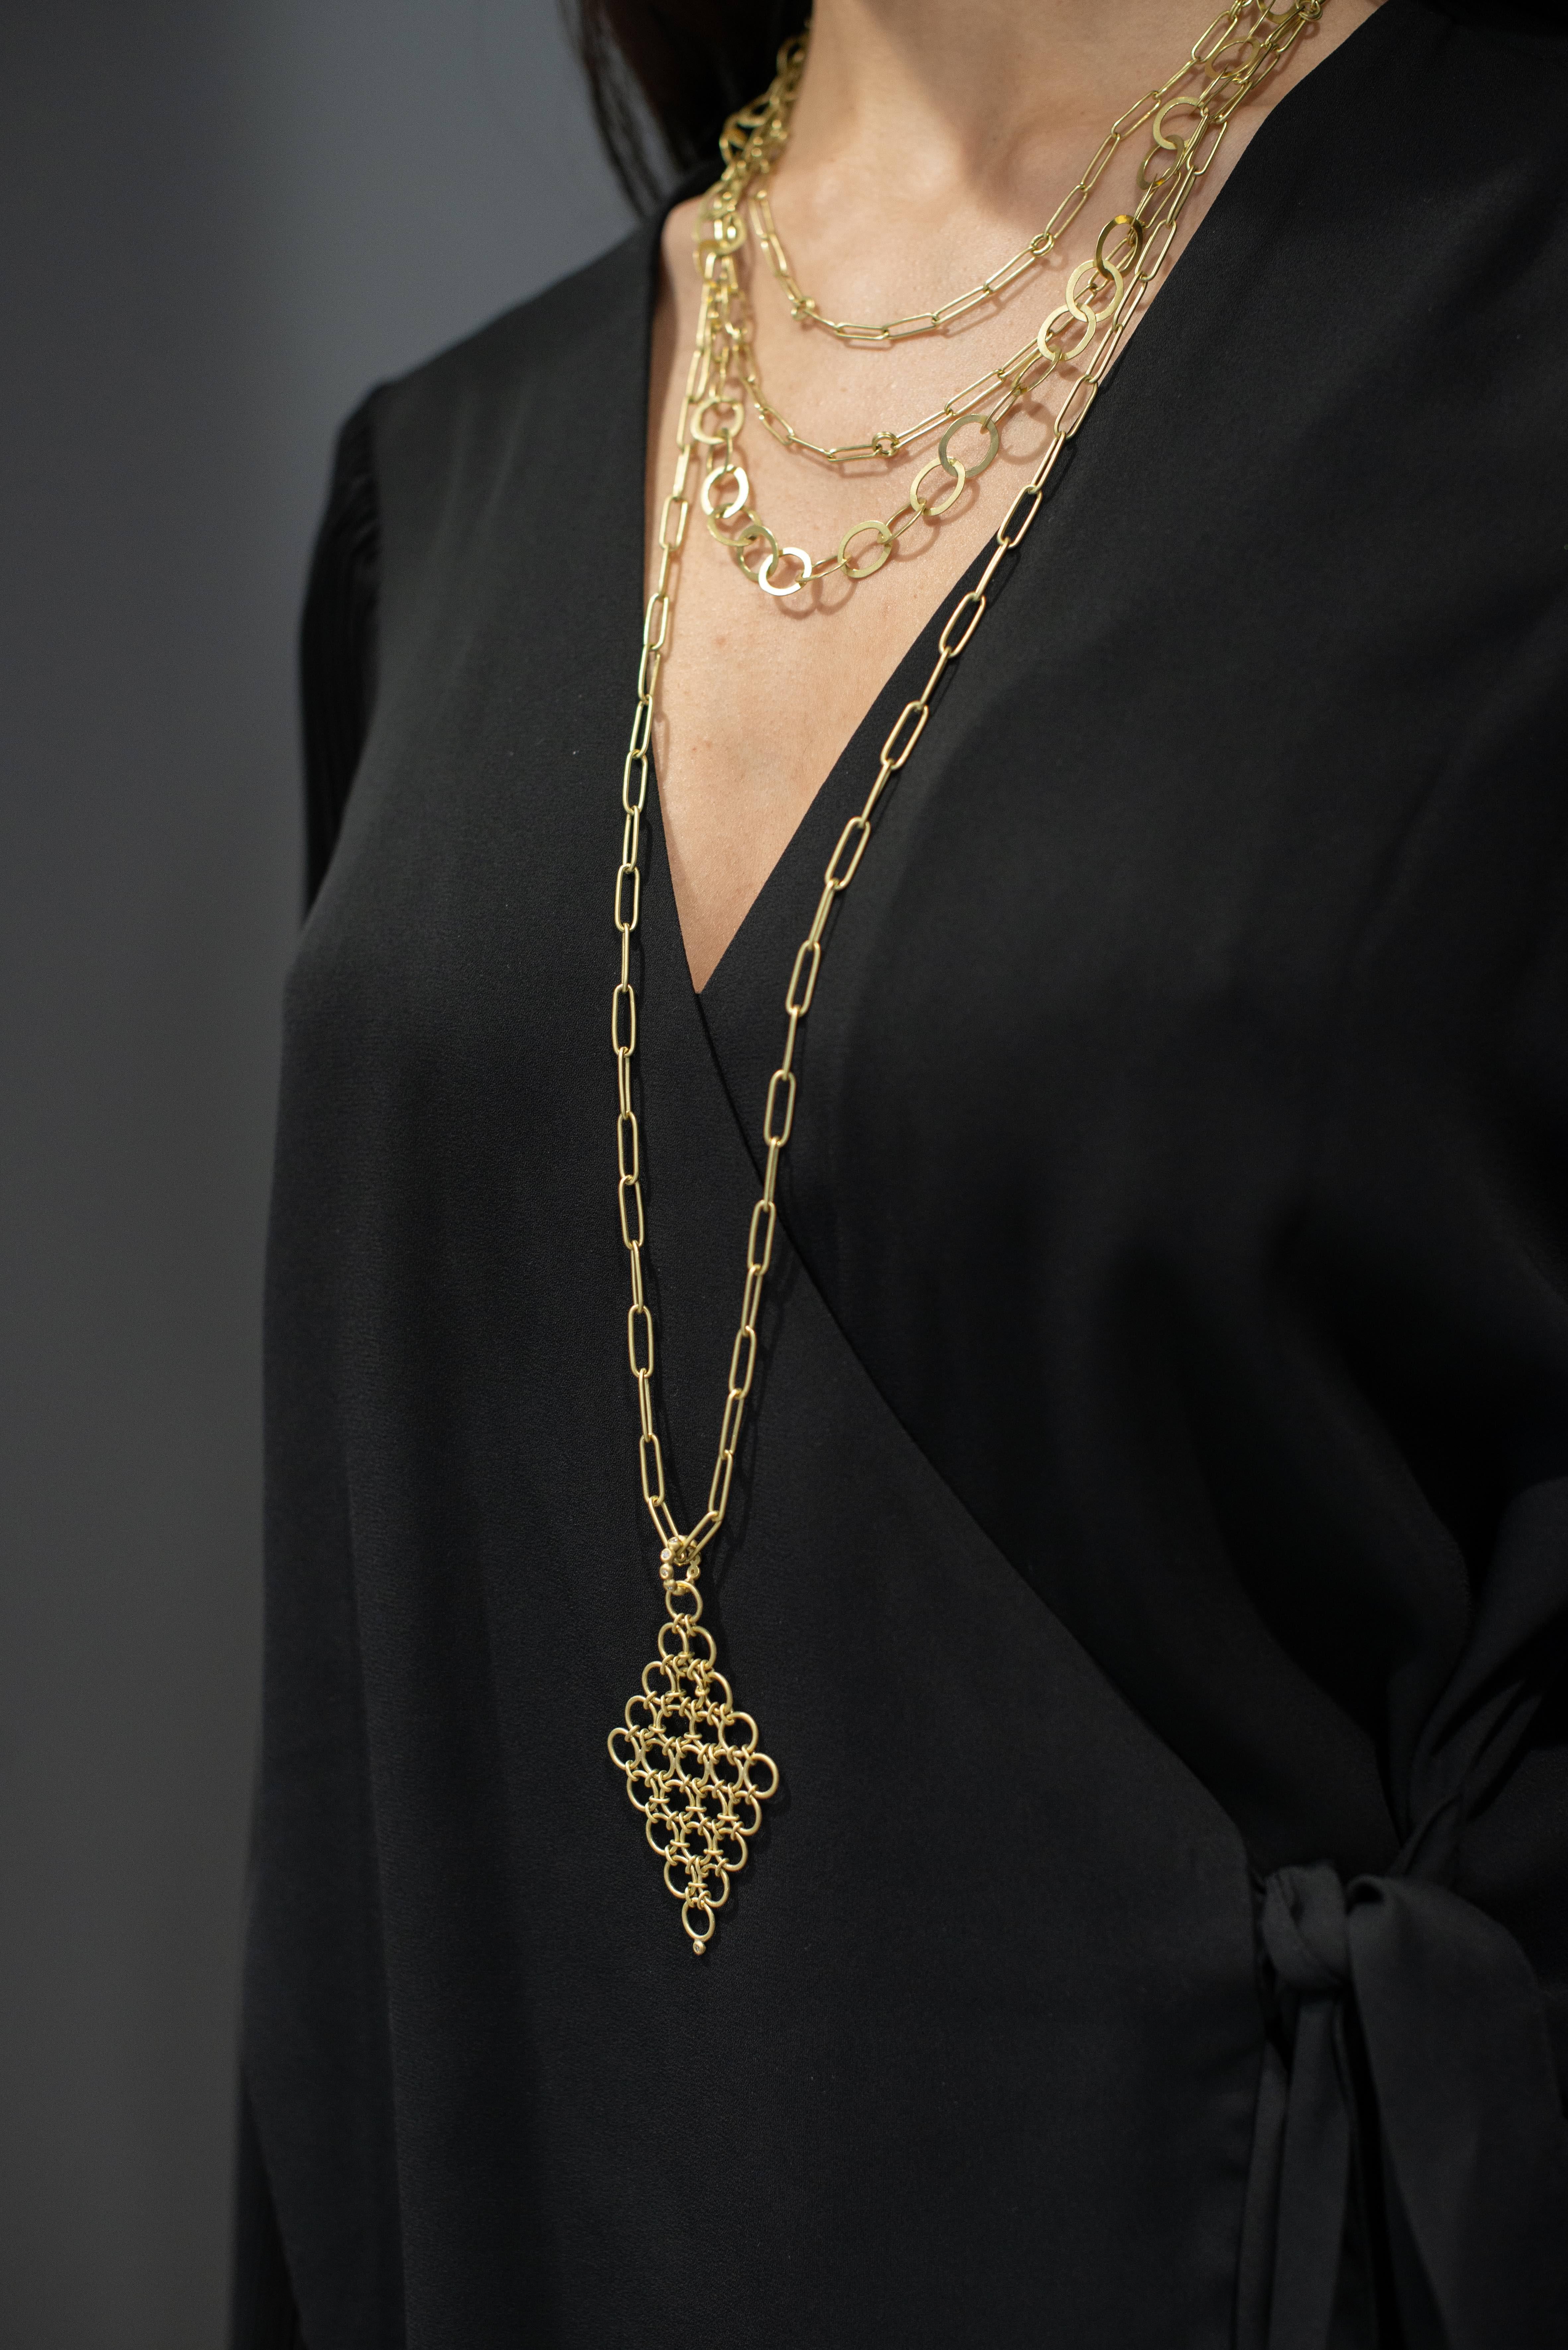 Faye Kim 18K Gold Handmade Diamond Mesh Pendant on Handmade Chain.

18k gold mesh pendant is handmade of flexible links. Finished with a diamond granulation bail and tip - it's the little details that make this pendant a statement piece. Featured on